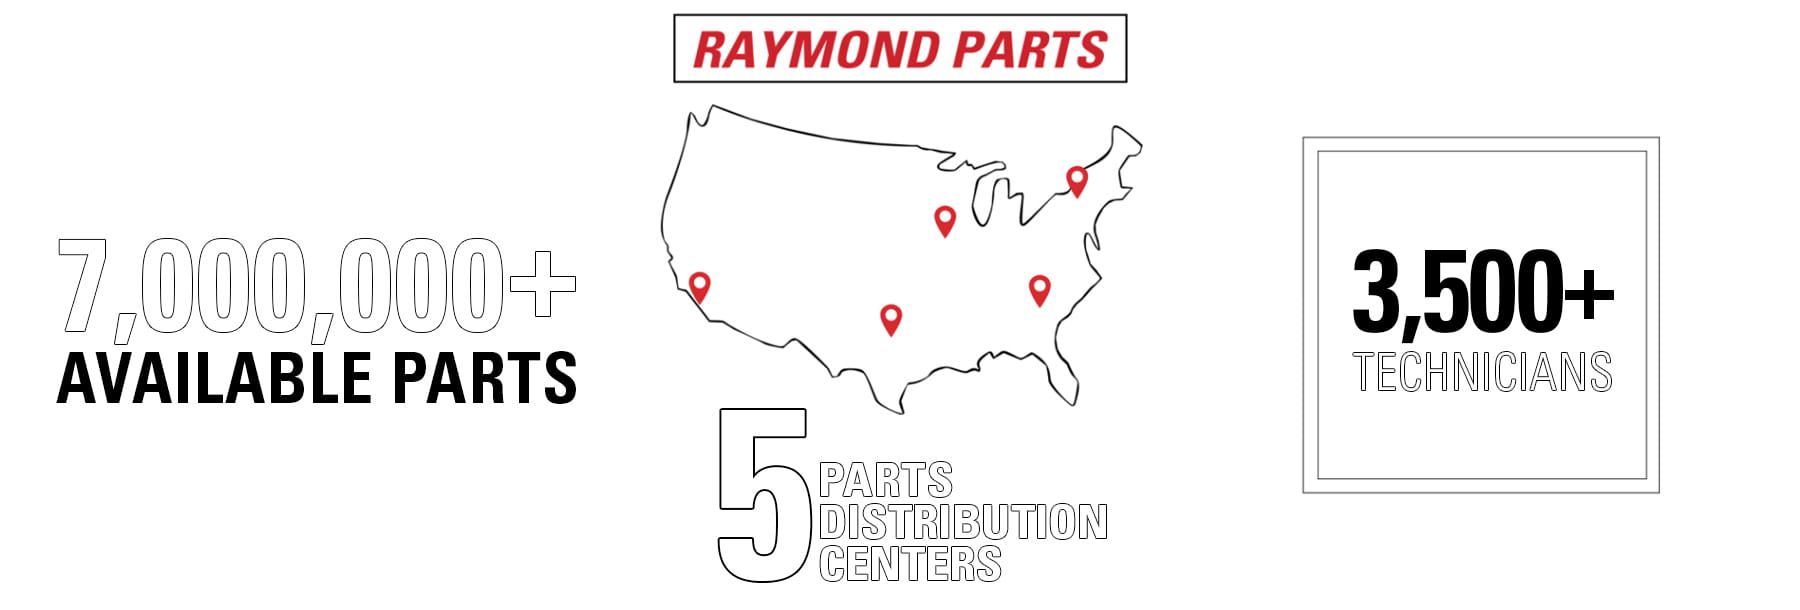 Contact Kit CR1045 Crown Electric Forklift Contactor Raymond RA154-008-740-2 